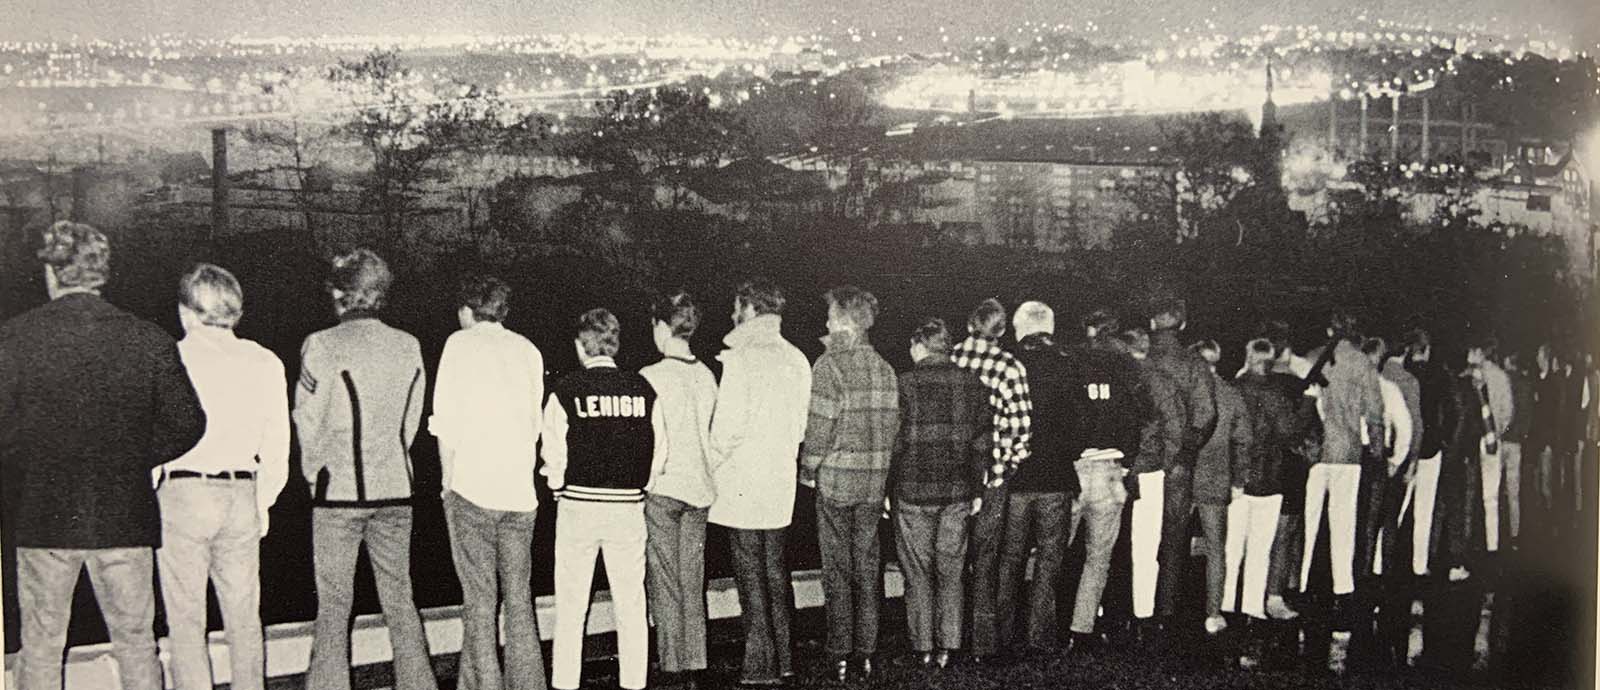 Men from 1970 McConn House stand on South Mountain and overlook the city